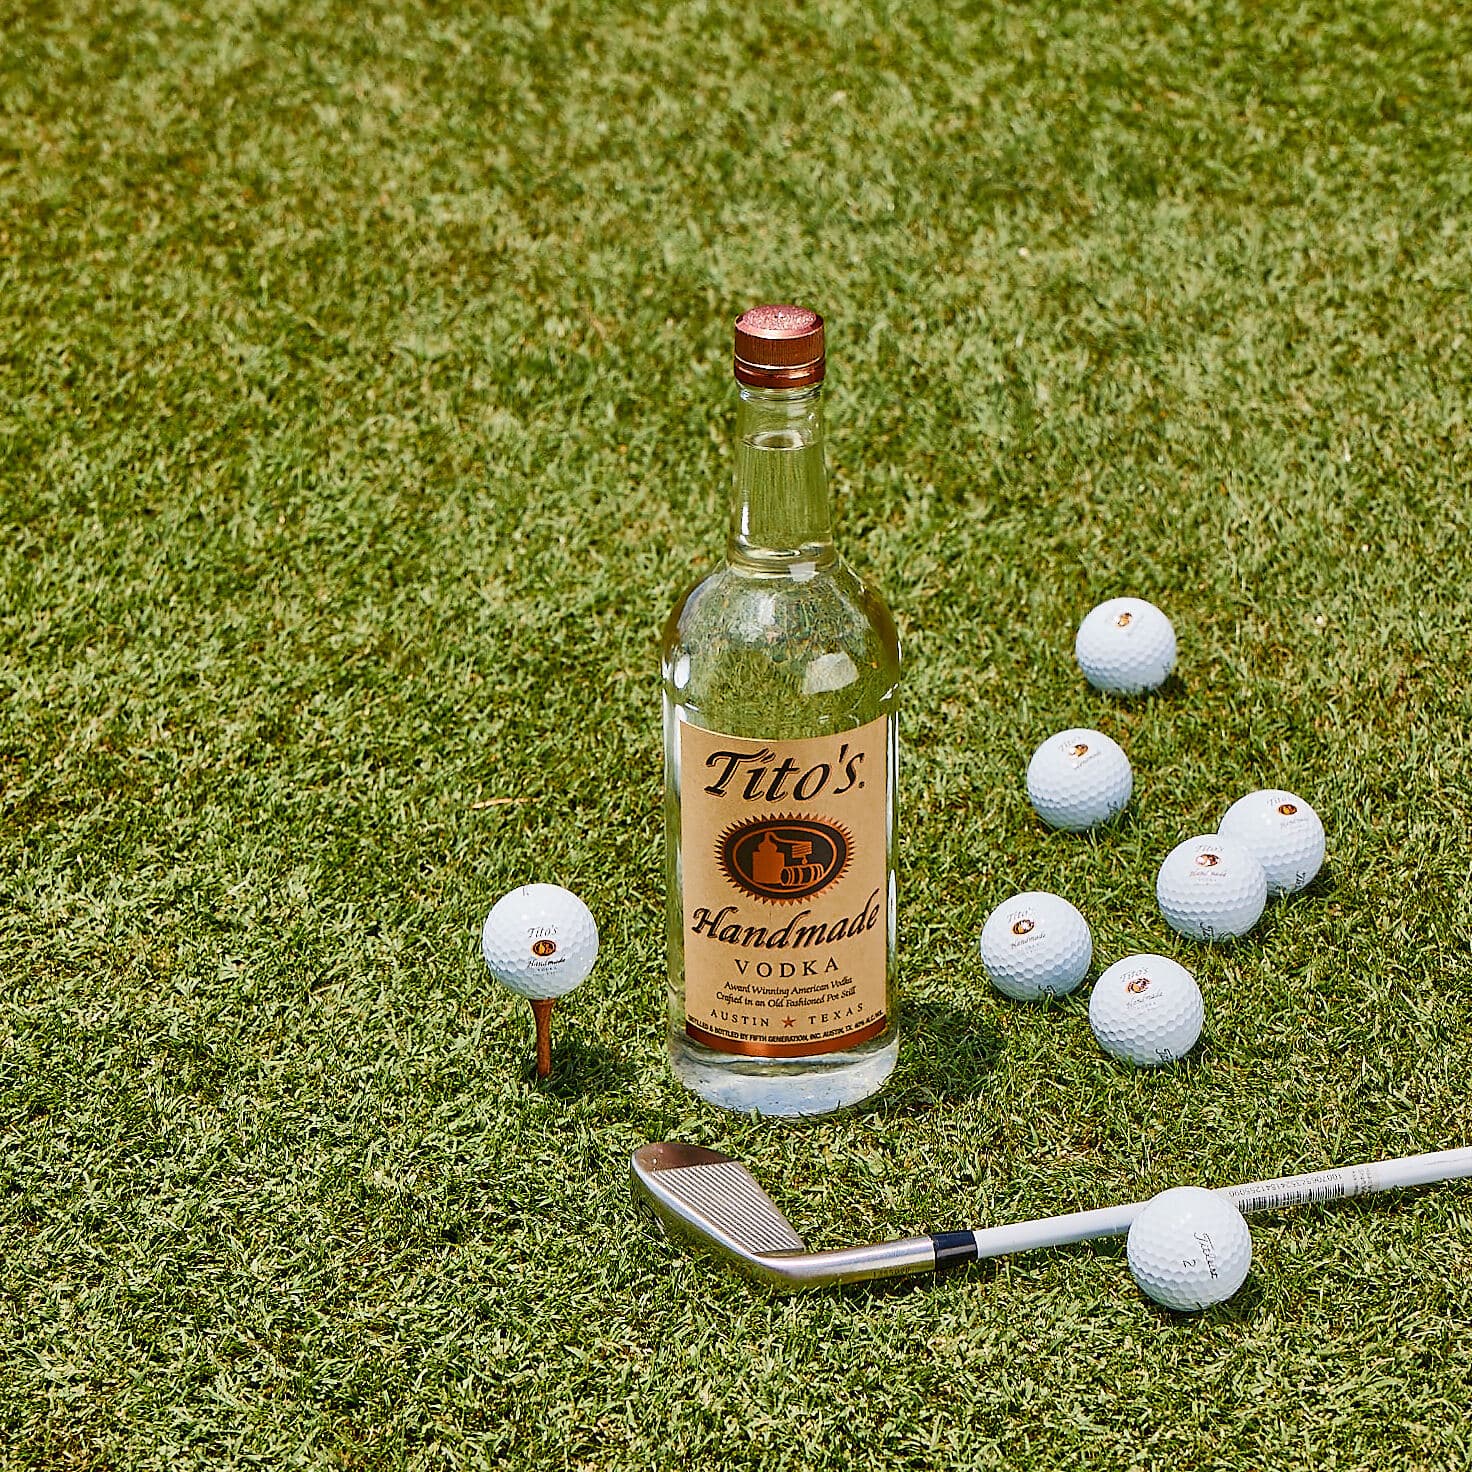 Tito's Handmade Vodka bottle on putting green with Tito's golf balls and silver putter